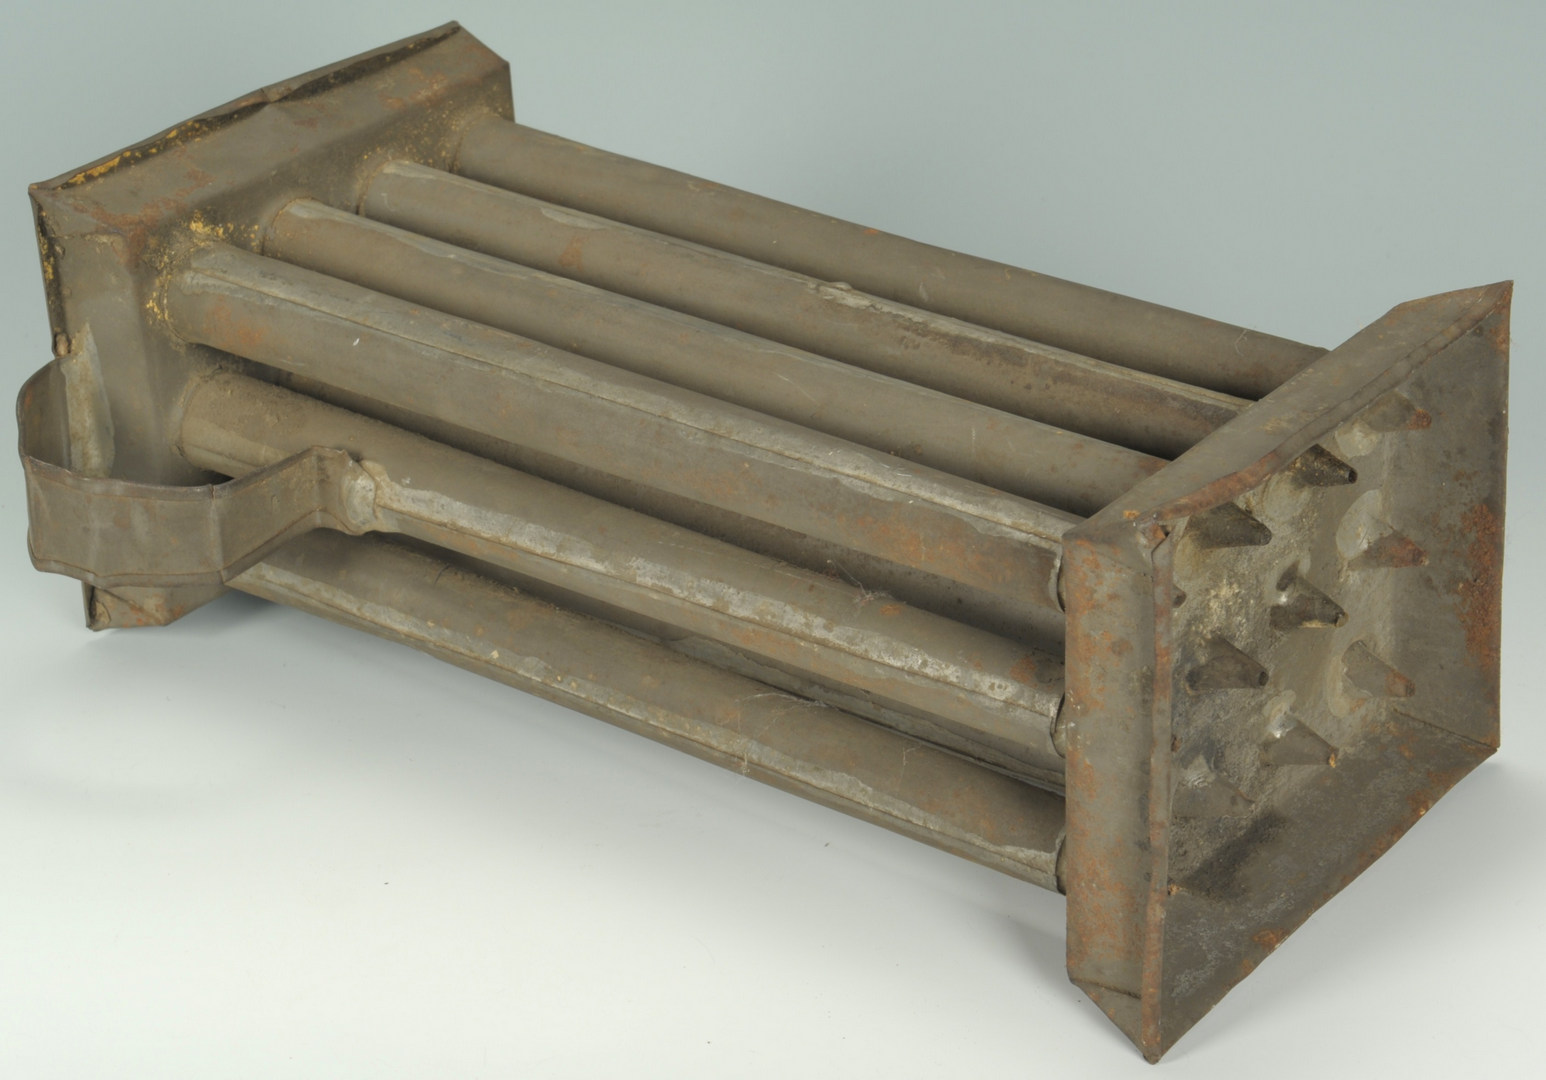 Lot 100: 19th Cent. Candle Mold, Foot Warmer & Copper Kettl